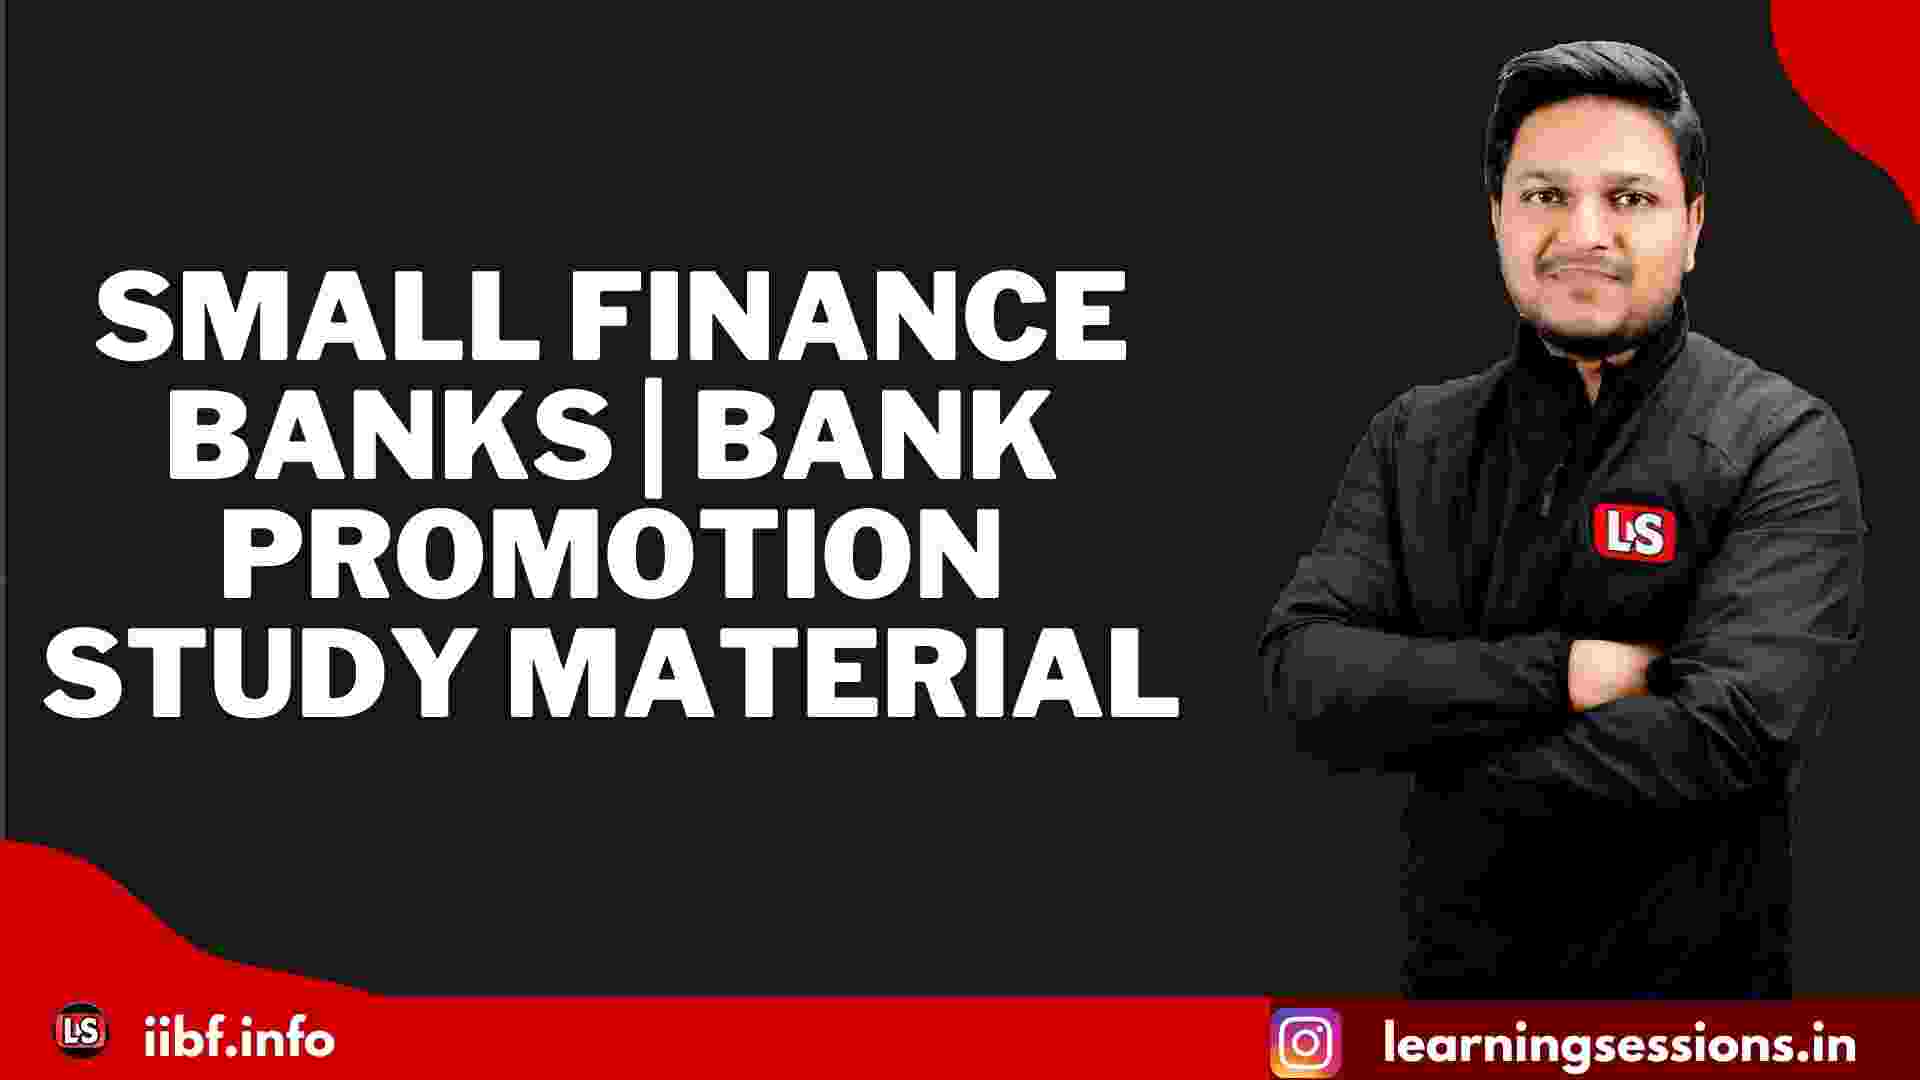 SMALL FINANCE BANKS | BANK PROMOTION STUDY MATERIAL